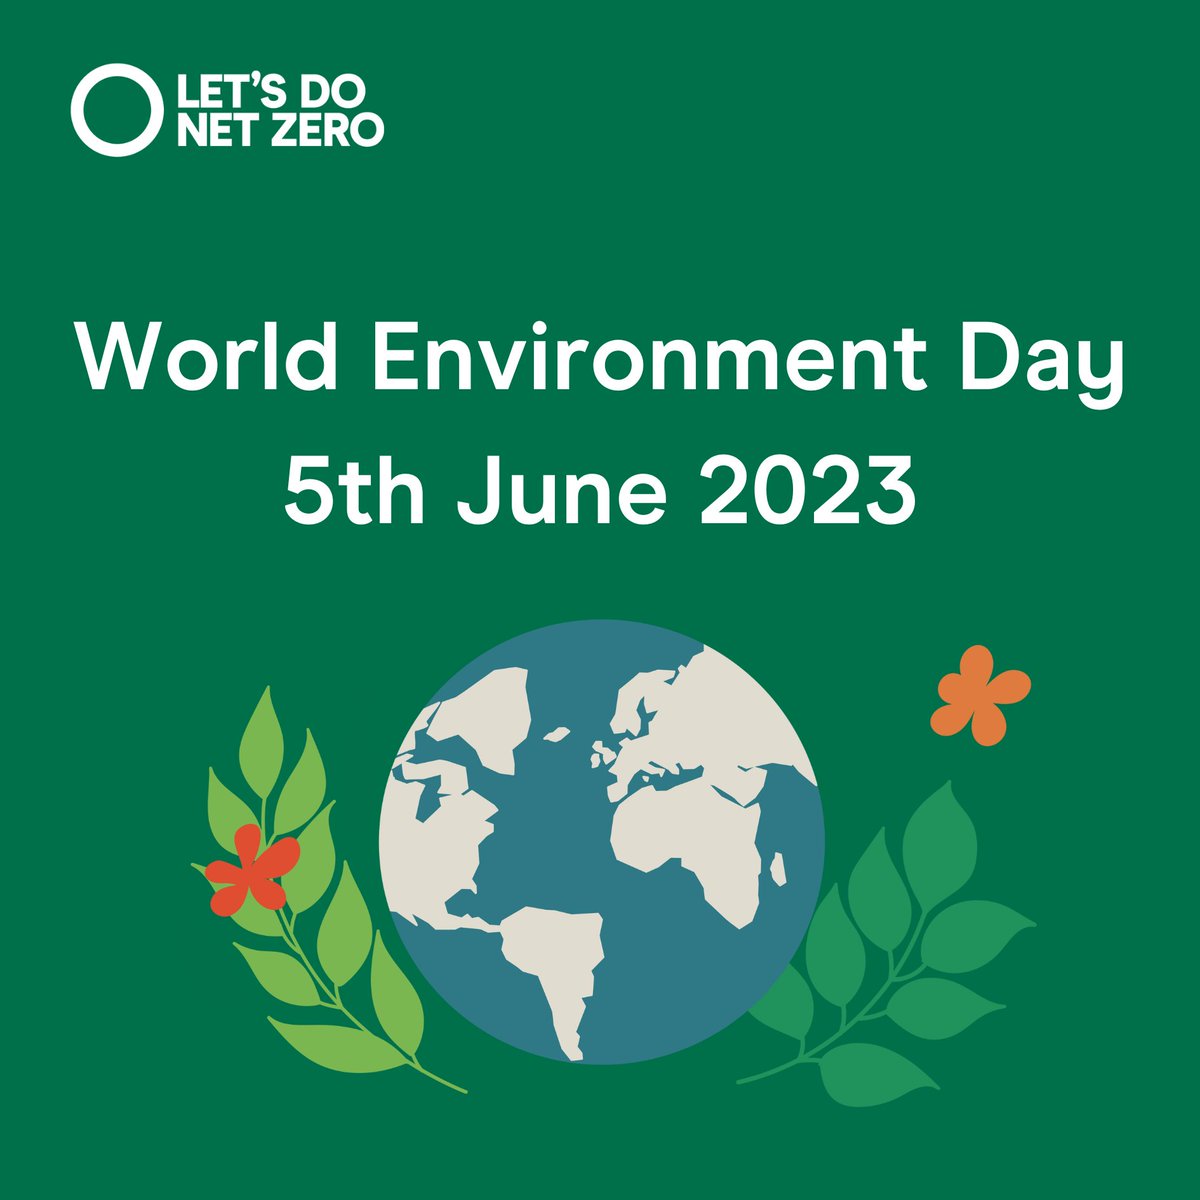 It's #WorldEnvironmentDay 2023! Protecting our environment and climate is humanities most pressing and unifying cause. The circular economy can help us move away from a world of waste to one where we respect our resources. 
Find out how: tinyurl.com/2p93n4mm 
#LetsDoNetZero